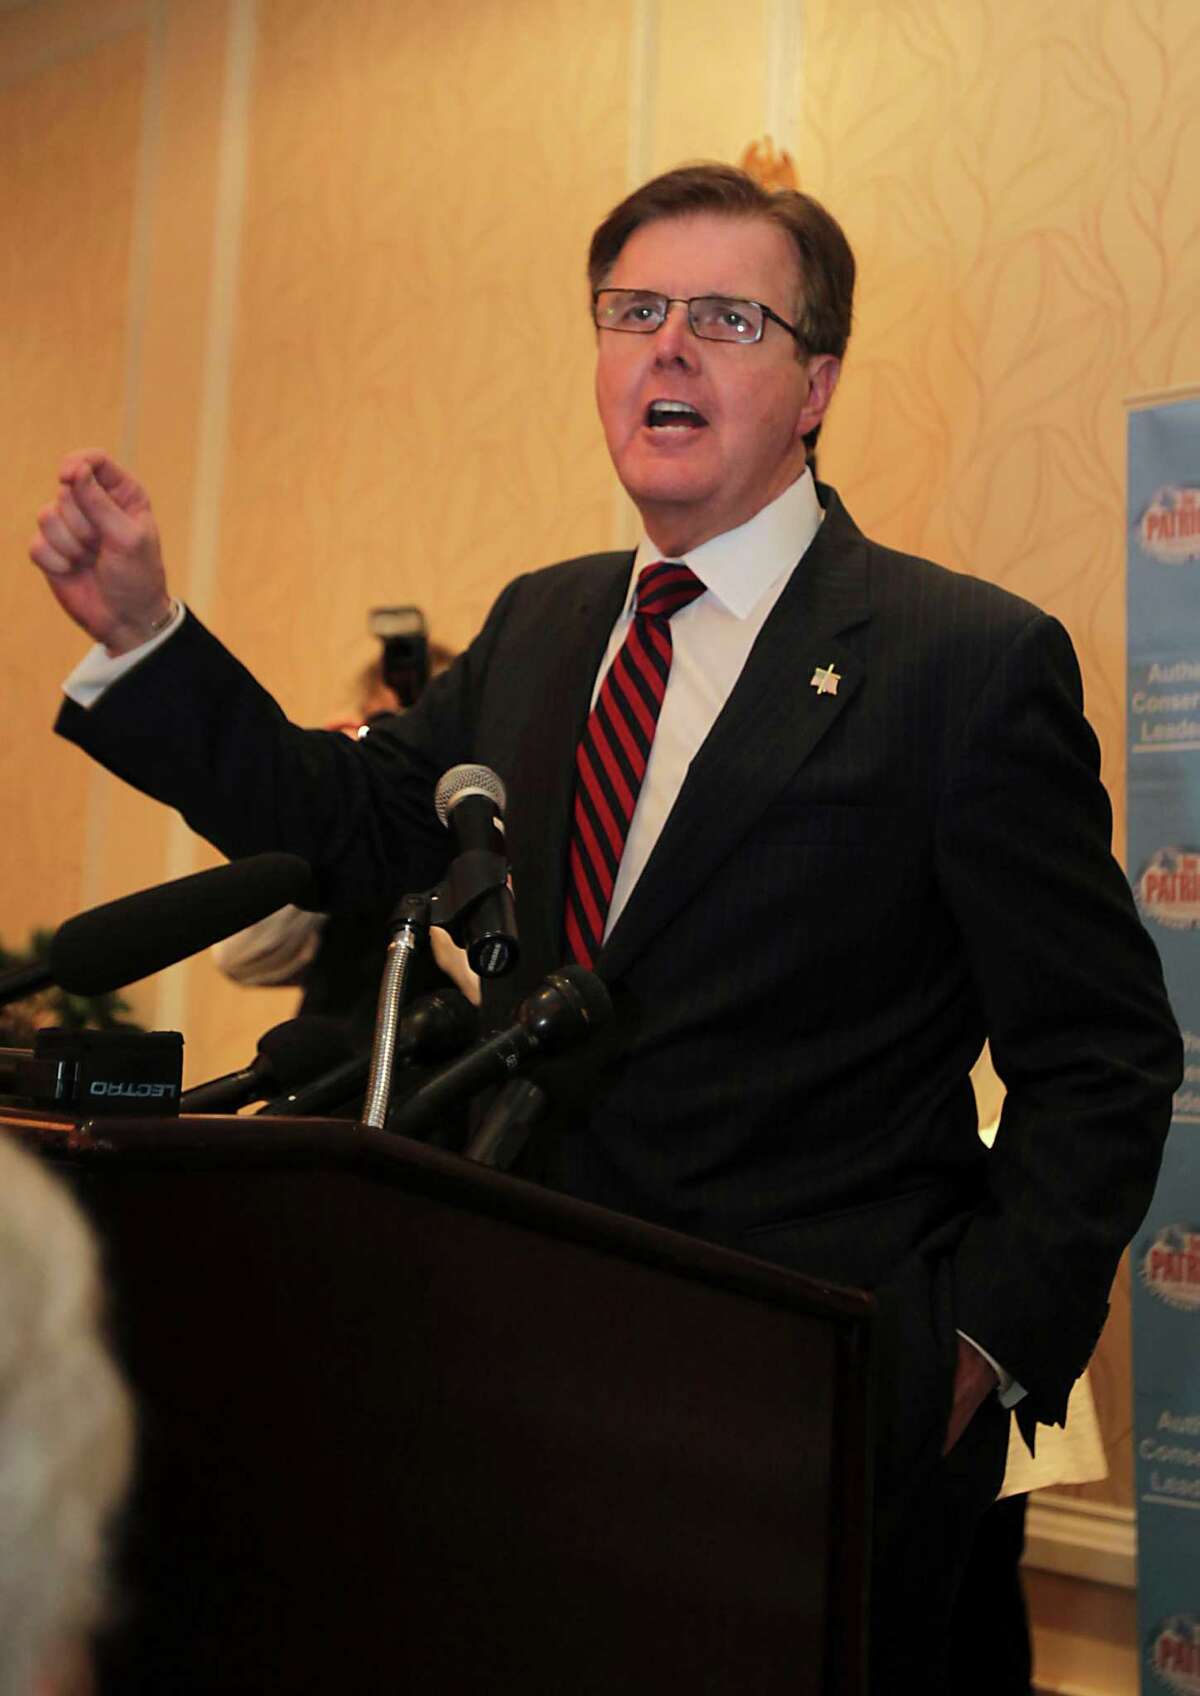 Dan Patrick, a candidate for the Republican nomination for Texas lieutenant governor, speaks during his election watch party Tuesday, March 4, 2014, in Houston. ((AP Photo/Houston Chronicle, James Nielsen) MANDATORY CREDIT